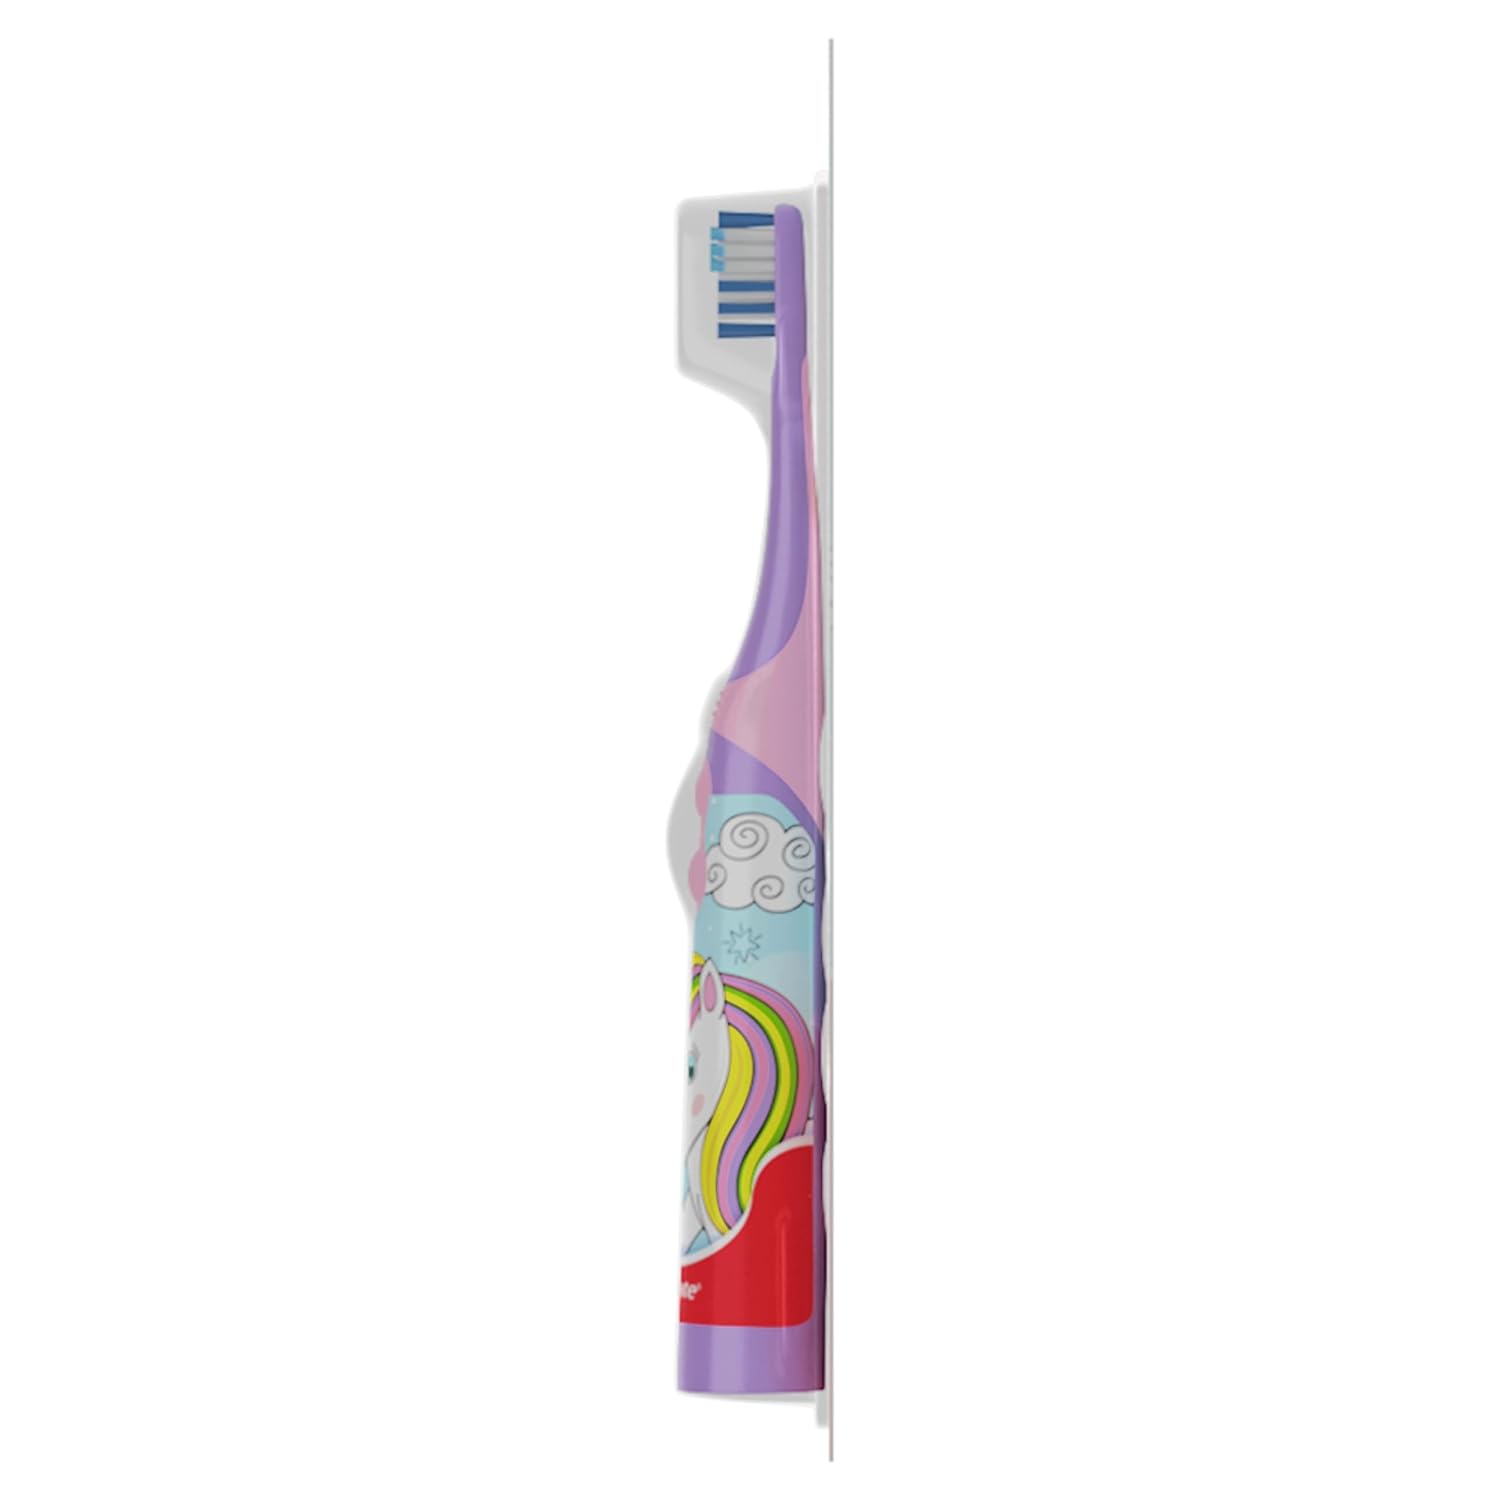 Colgate Kids Battery Powered Toothbrush, Unicorn, Extra Soft Toothbrush, Ages 3 and Up, 1 Pack